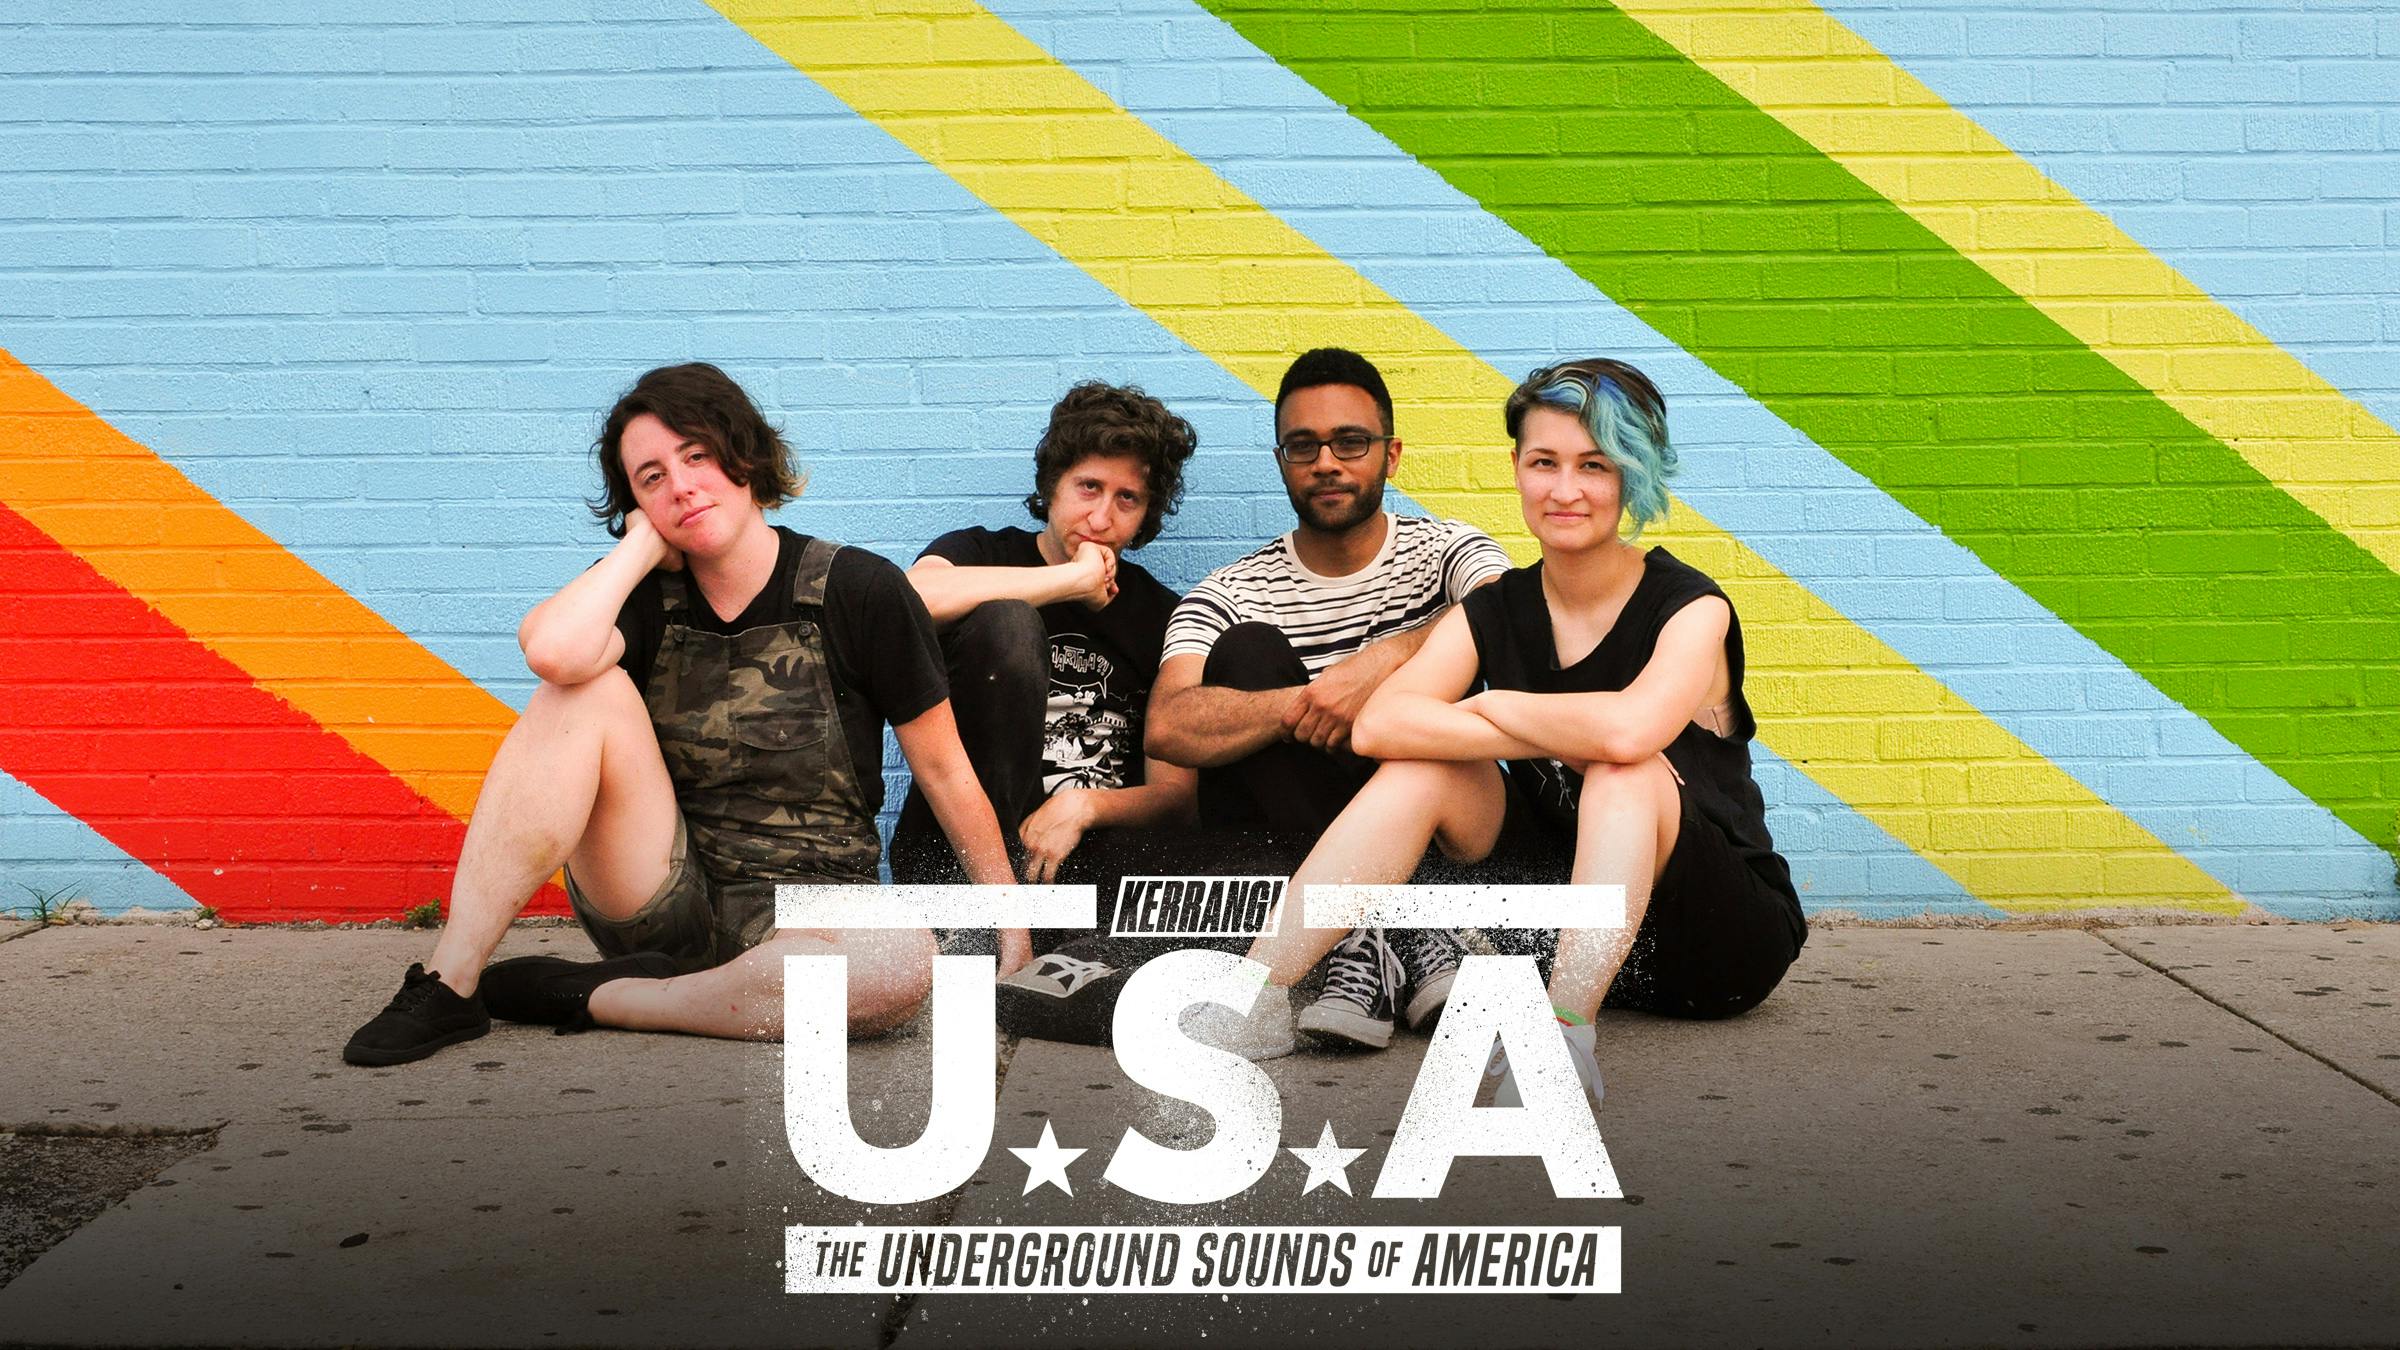 The Underground Sounds Of America: Bad Moves